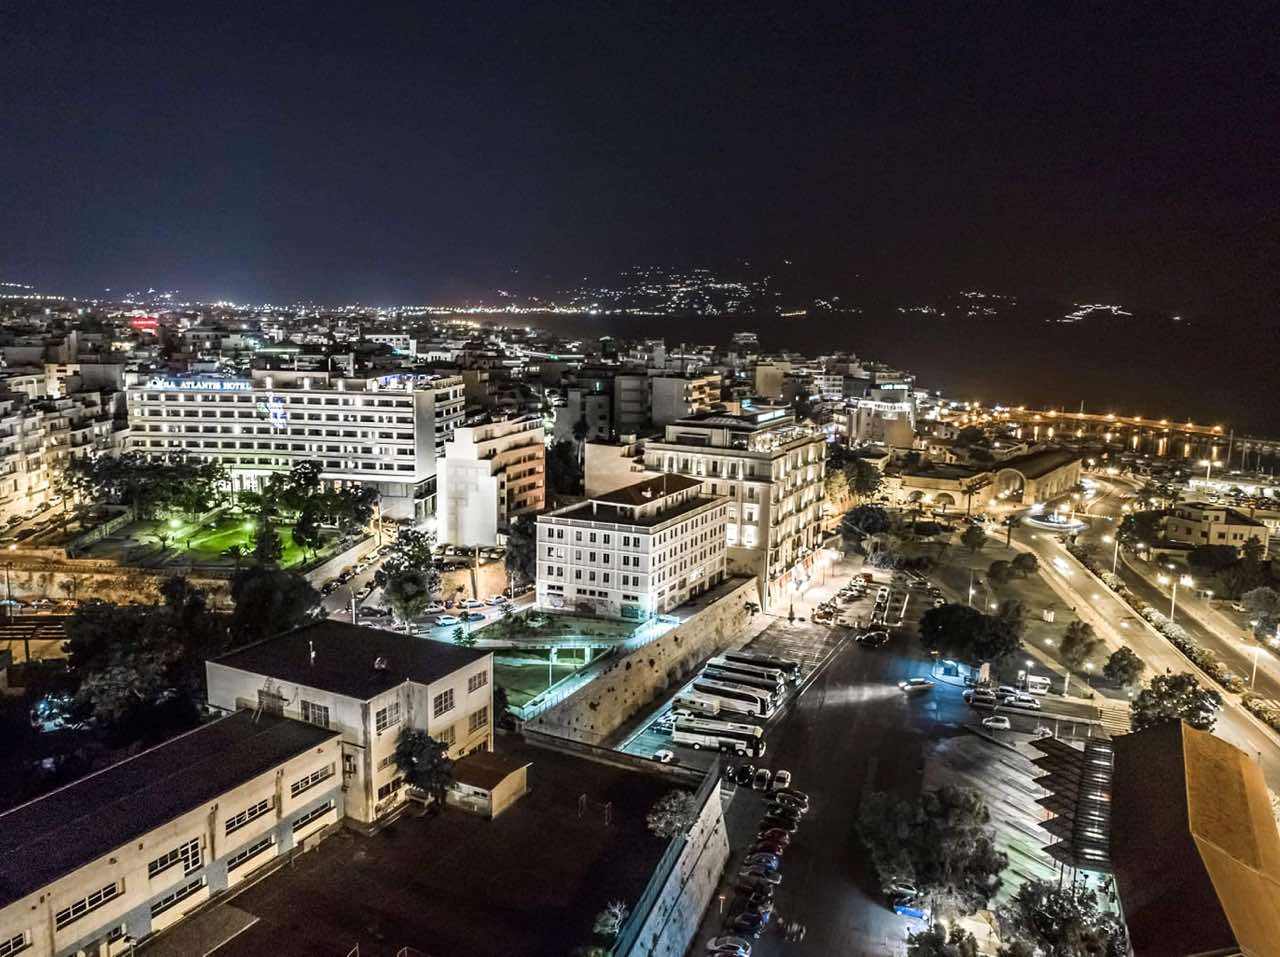 Photo of Day - Heraklion Town by Night